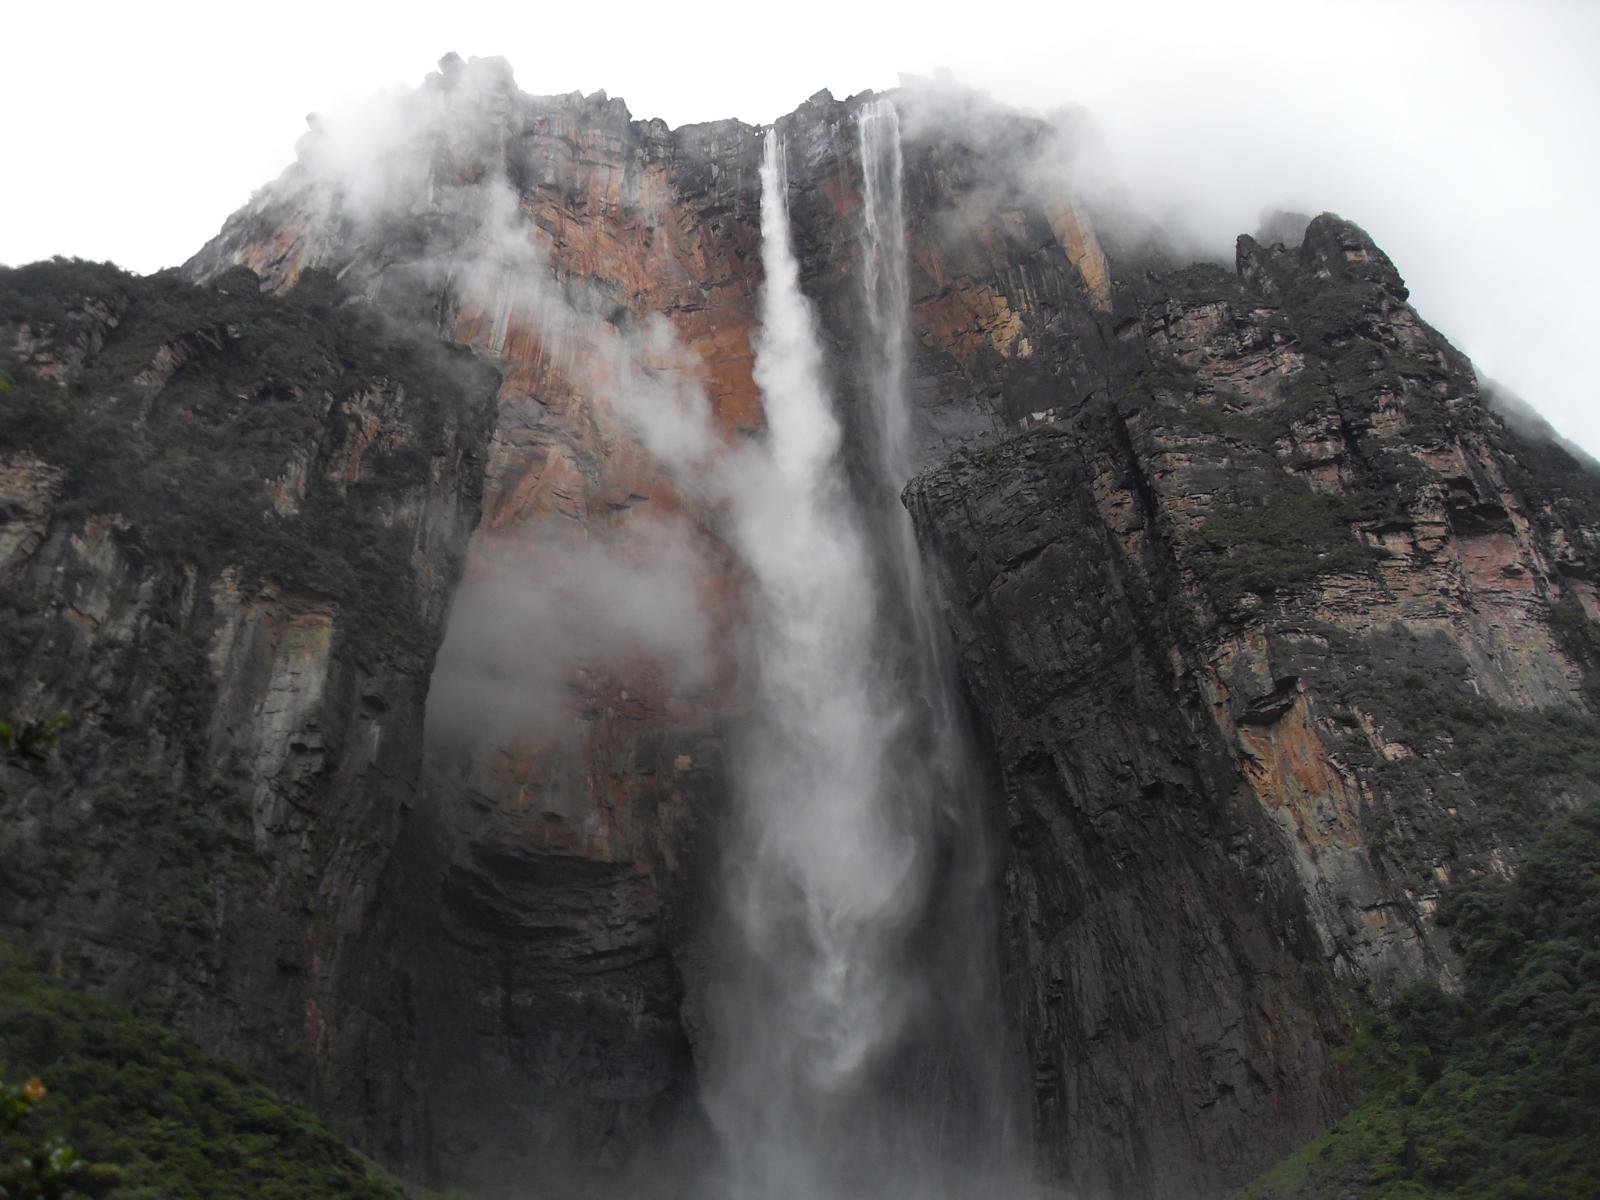 where is the highest waterfall in the world and when did jimmy angel discover angel falls in venezuela